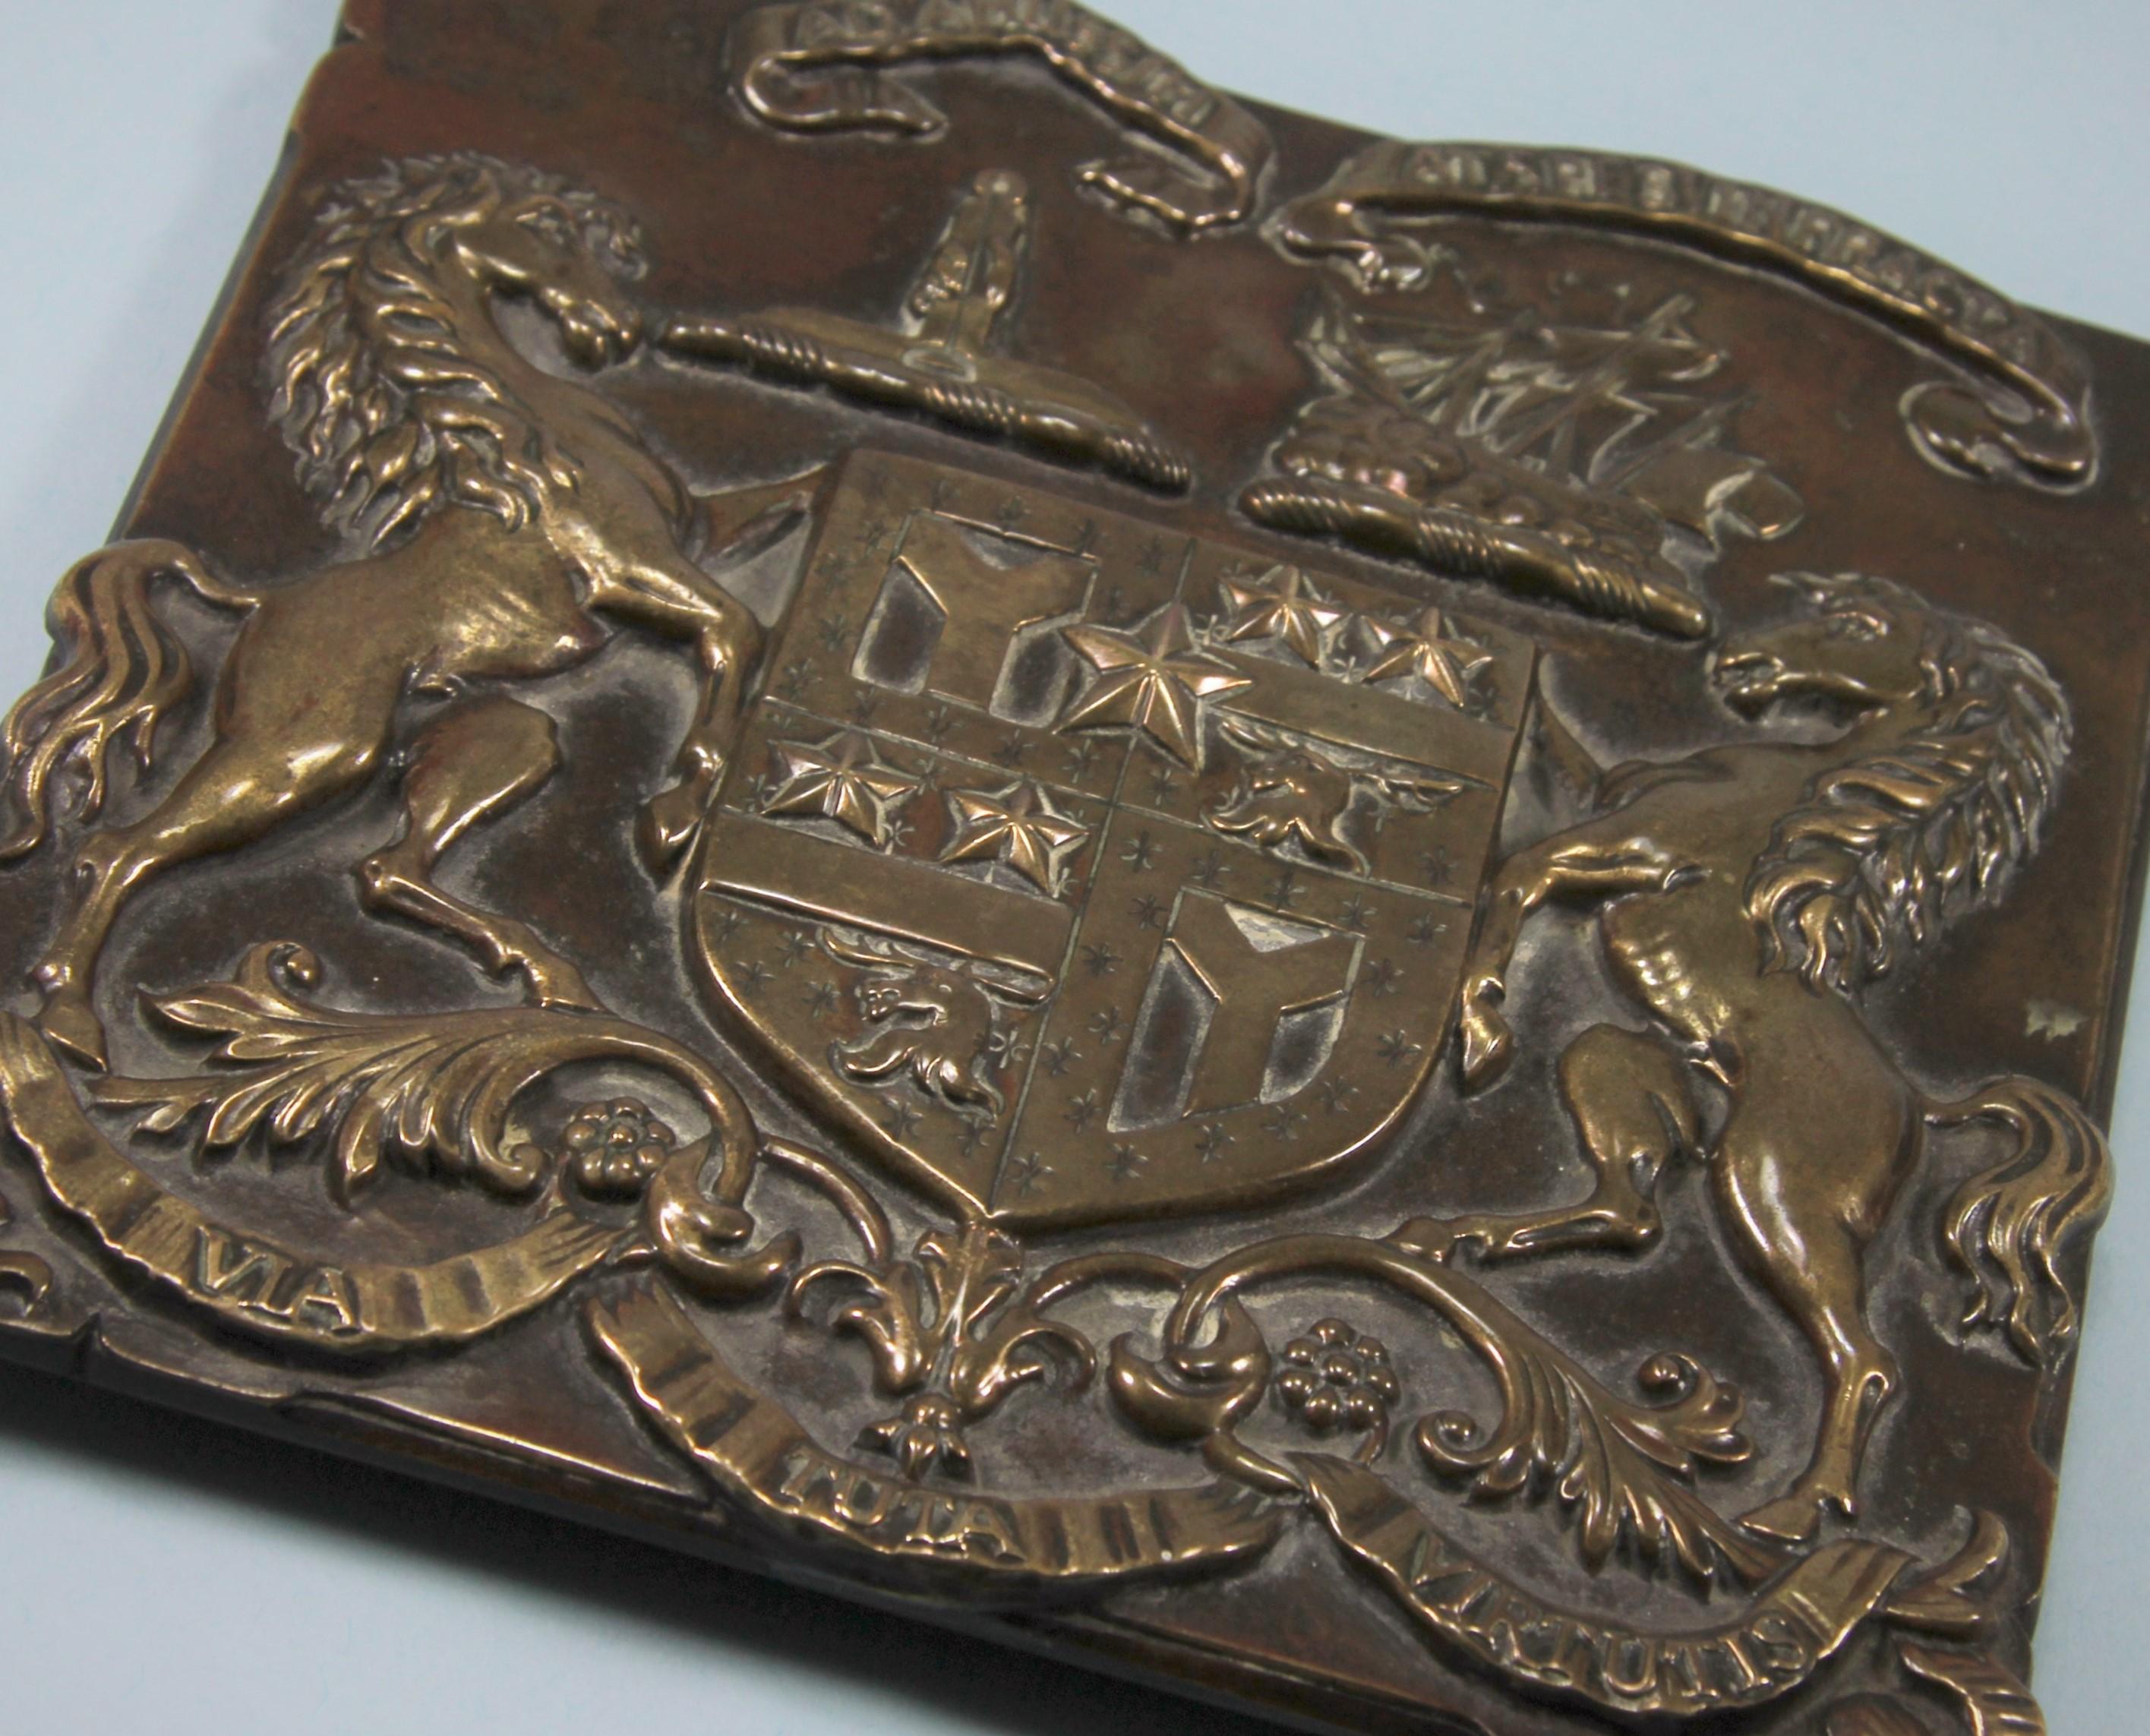 A fine example of a late-19th century copper coach plate attributed to a member of the Smith Cuninghame Family of Caprington Castle, Kilmarnock, Ayrshire, circa 1890. 

Displays a full heraldic achievement with two crests and mottos above a full